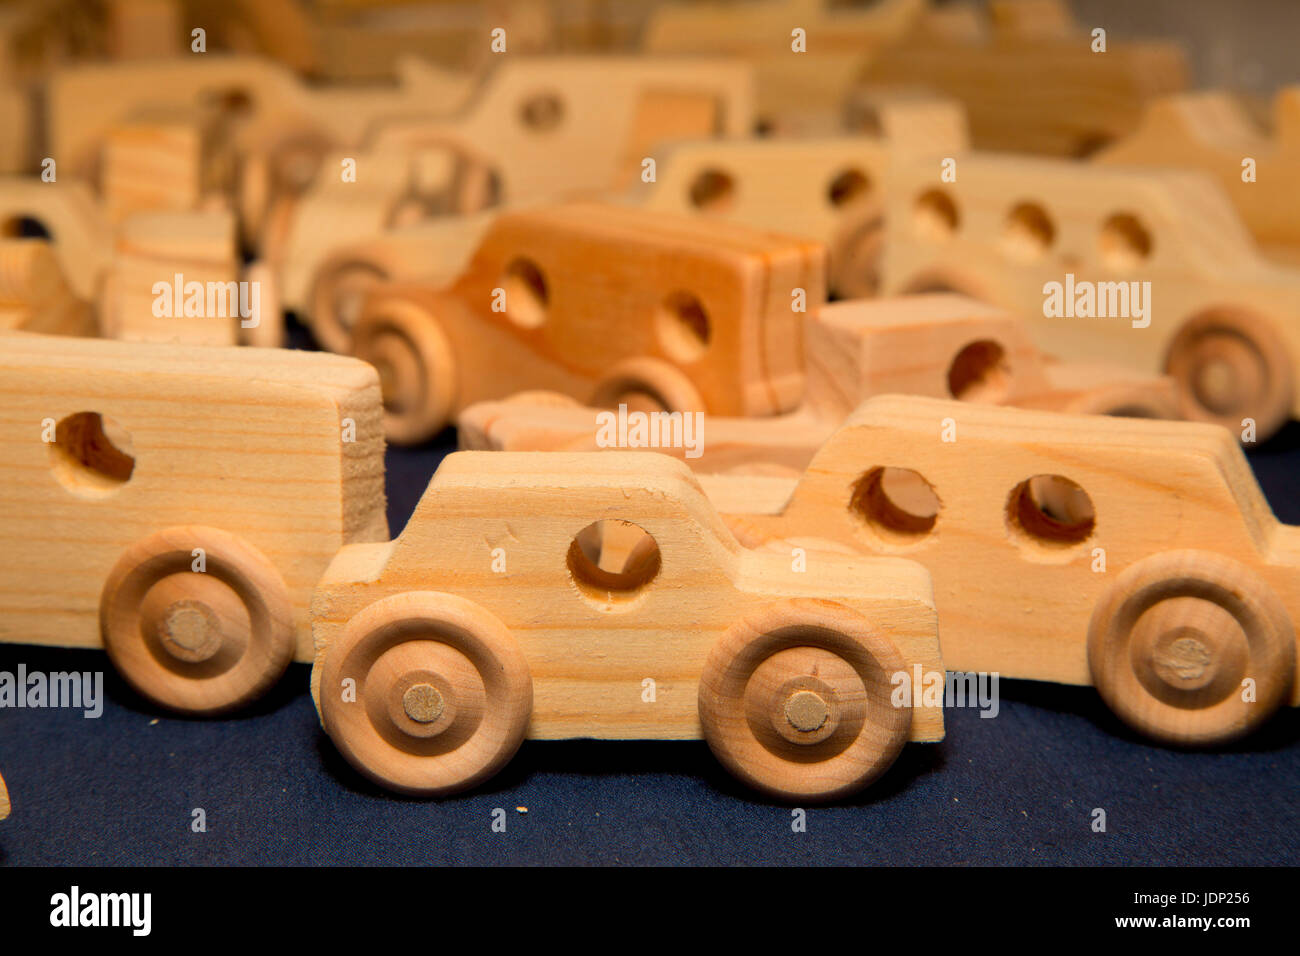 Wooden cars Stock Photo